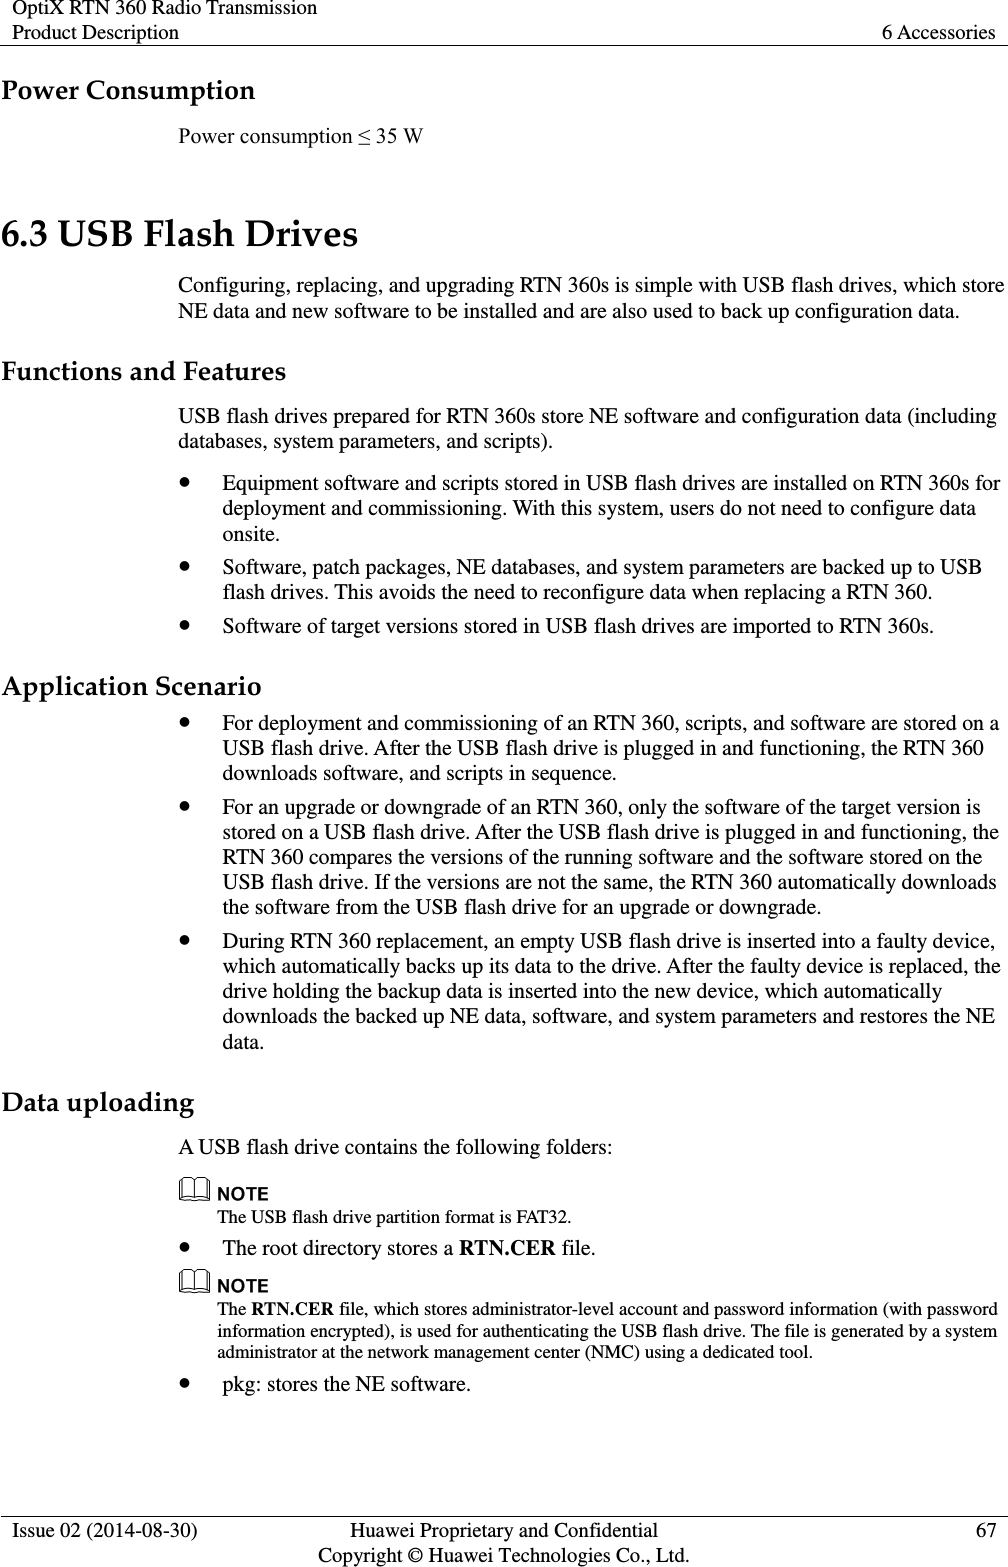 OptiX RTN 360 Radio Transmission Product Description 6 Accessories  Issue 02 (2014-08-30) Huawei Proprietary and Confidential                                     Copyright © Huawei Technologies Co., Ltd. 67  Power Consumption Power consumption ≤ 35 W 6.3 USB Flash Drives Configuring, replacing, and upgrading RTN 360s is simple with USB flash drives, which store NE data and new software to be installed and are also used to back up configuration data. Functions and Features USB flash drives prepared for RTN 360s store NE software and configuration data (including databases, system parameters, and scripts).  Equipment software and scripts stored in USB flash drives are installed on RTN 360s for deployment and commissioning. With this system, users do not need to configure data onsite.  Software, patch packages, NE databases, and system parameters are backed up to USB flash drives. This avoids the need to reconfigure data when replacing a RTN 360.  Software of target versions stored in USB flash drives are imported to RTN 360s. Application Scenario  For deployment and commissioning of an RTN 360, scripts, and software are stored on a USB flash drive. After the USB flash drive is plugged in and functioning, the RTN 360 downloads software, and scripts in sequence.  For an upgrade or downgrade of an RTN 360, only the software of the target version is stored on a USB flash drive. After the USB flash drive is plugged in and functioning, the RTN 360 compares the versions of the running software and the software stored on the USB flash drive. If the versions are not the same, the RTN 360 automatically downloads the software from the USB flash drive for an upgrade or downgrade.  During RTN 360 replacement, an empty USB flash drive is inserted into a faulty device, which automatically backs up its data to the drive. After the faulty device is replaced, the drive holding the backup data is inserted into the new device, which automatically downloads the backed up NE data, software, and system parameters and restores the NE data. Data uploading A USB flash drive contains the following folders:  The USB flash drive partition format is FAT32.  The root directory stores a RTN.CER file.  The RTN.CER file, which stores administrator-level account and password information (with password information encrypted), is used for authenticating the USB flash drive. The file is generated by a system administrator at the network management center (NMC) using a dedicated tool.  pkg: stores the NE software.  